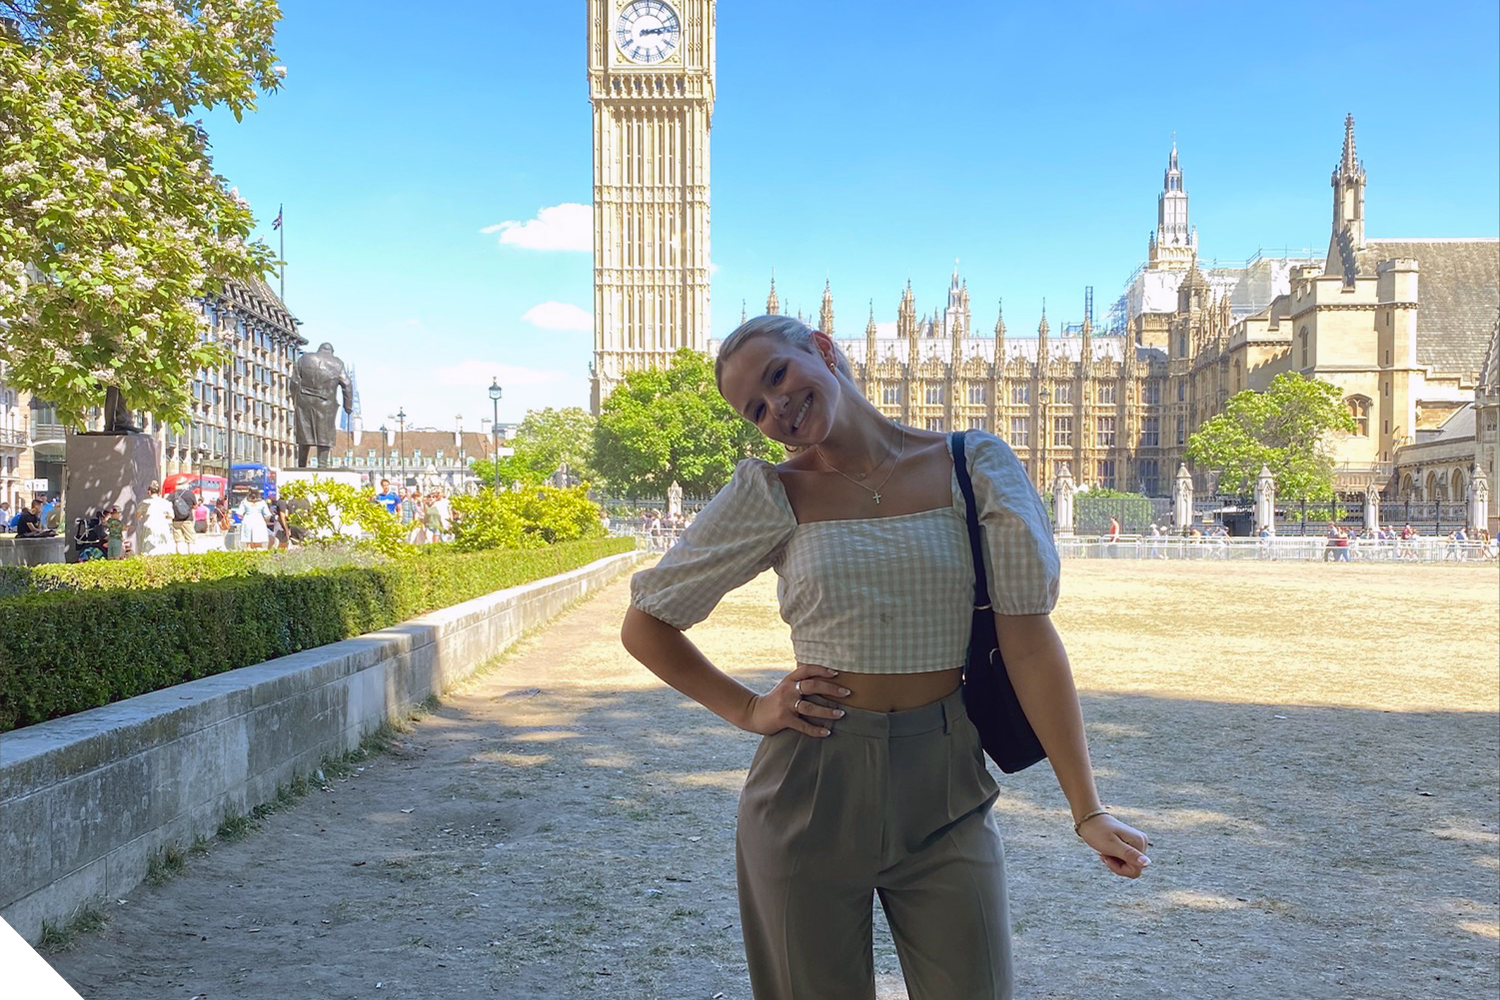 Lizzie Stern on an education abroad trip to England